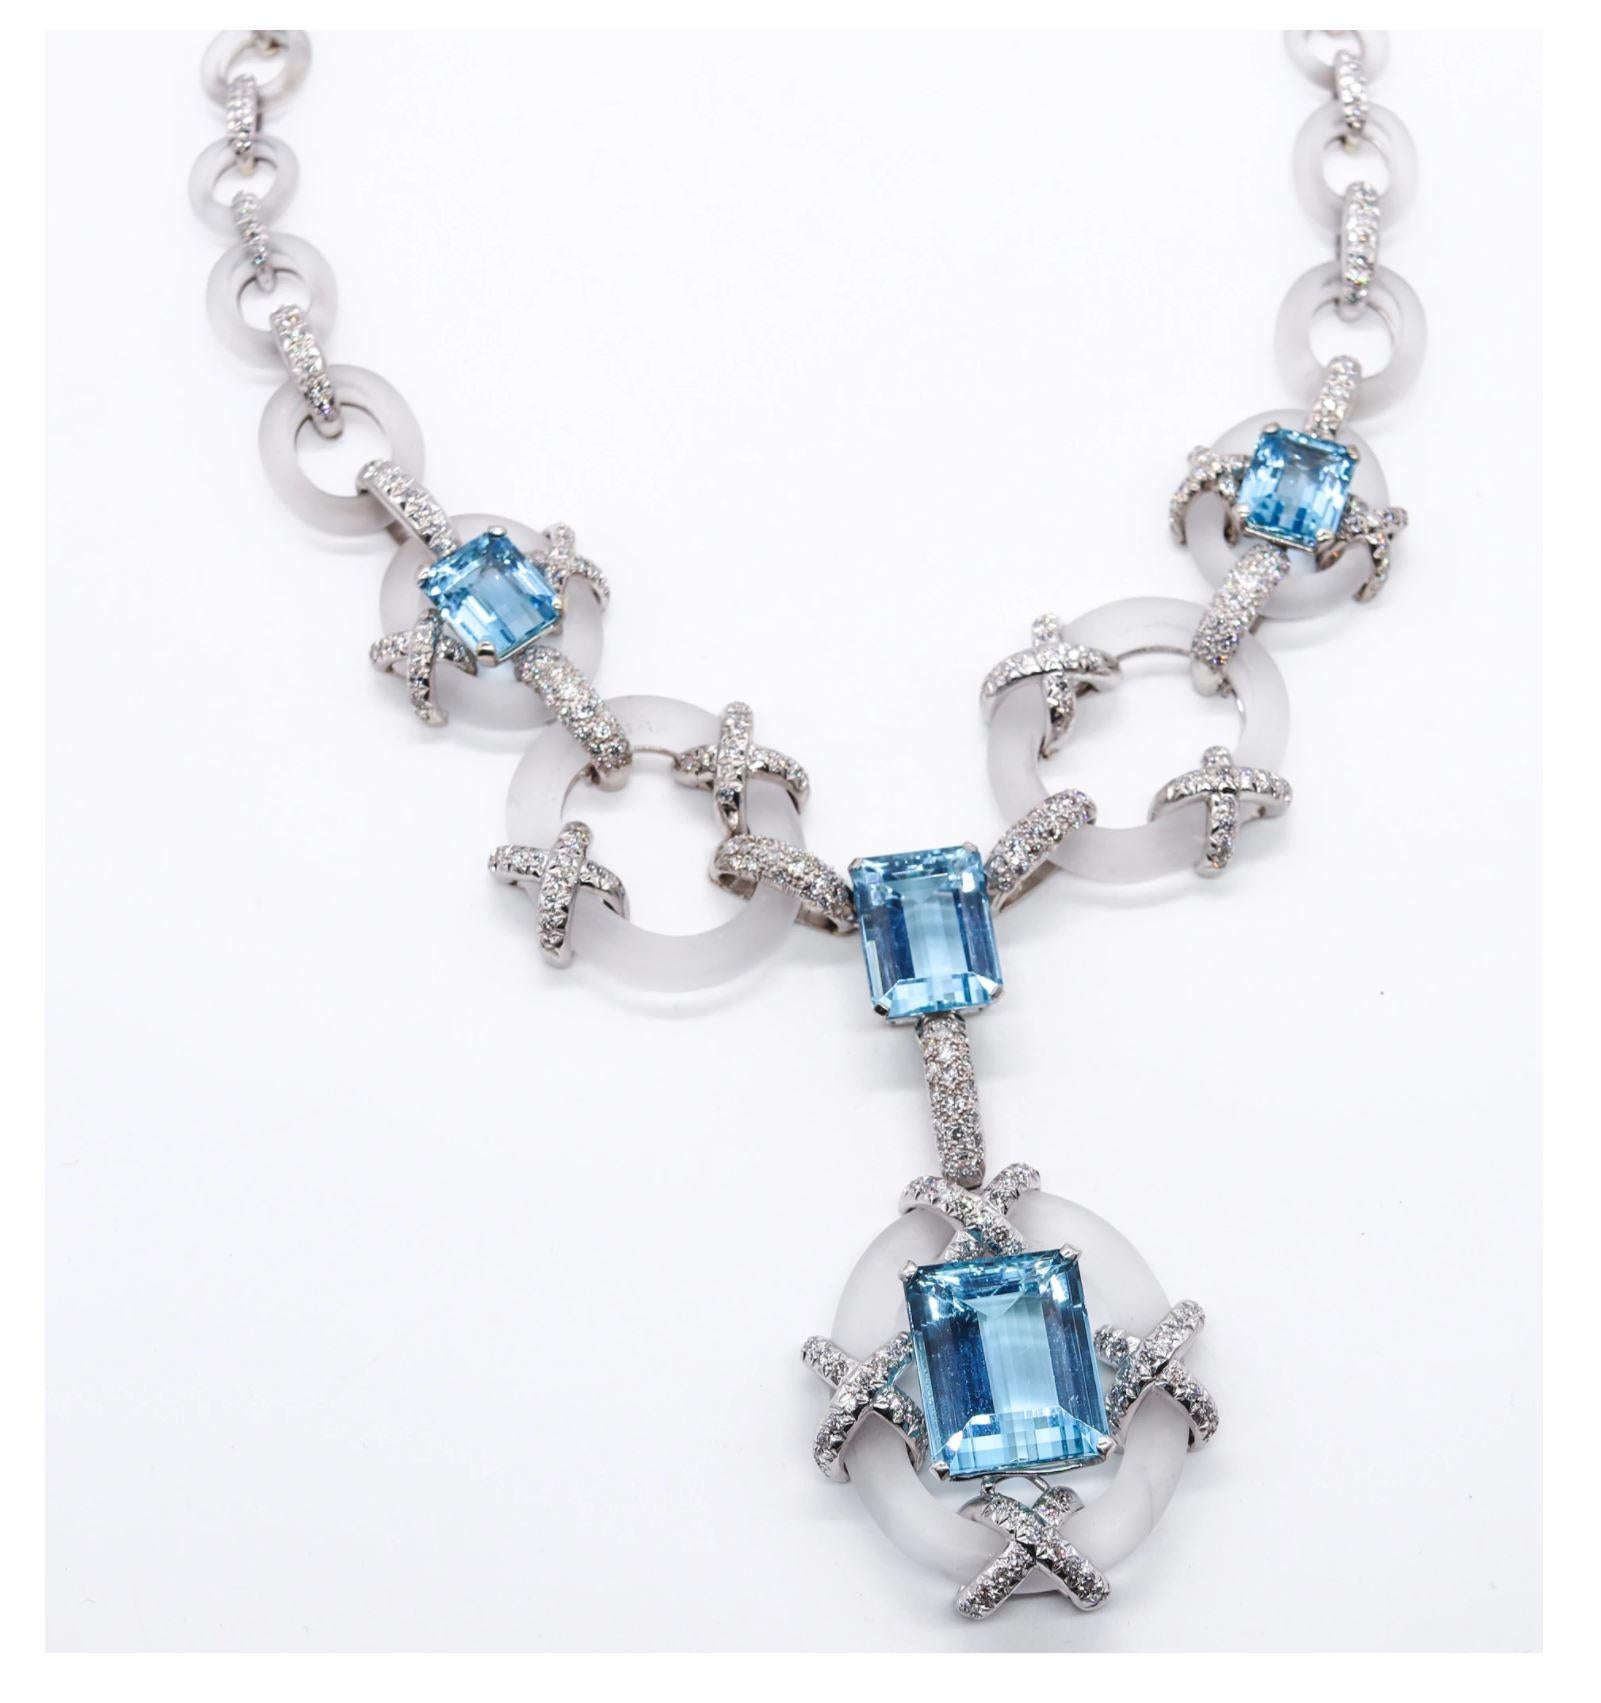 Magnificent Convertible Necklace designed by Kutchinsky.

Extraordinary one-of-a-kind piece, created in London, England by the jewelry house of Kutchinsky, back in the 1970's. This magnificent necklace has been carefully crafted in .900/.999